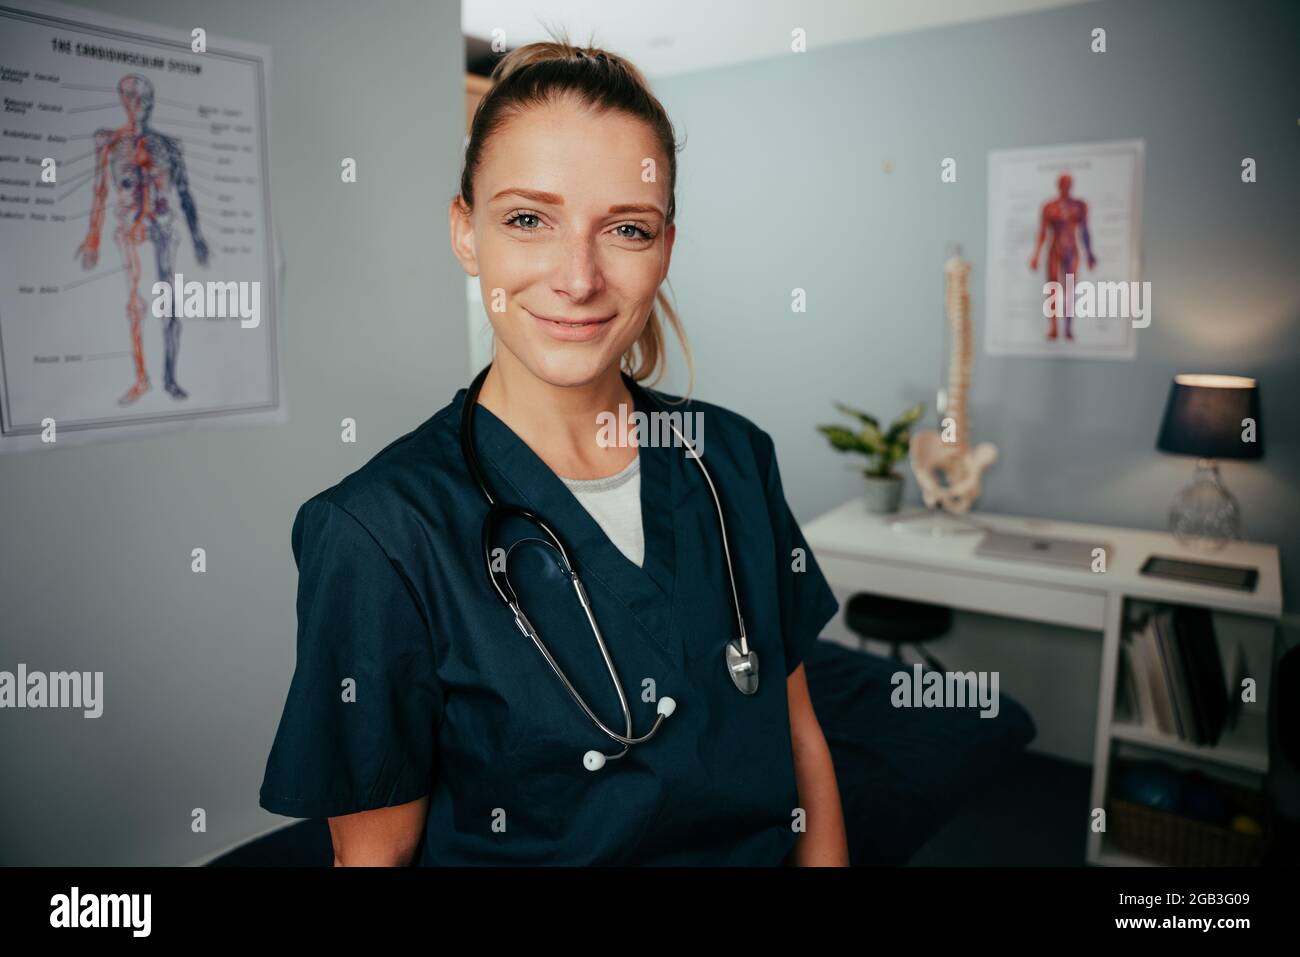 Caucasian female doctor standing in clinic wearing scrubs  Stock Photo